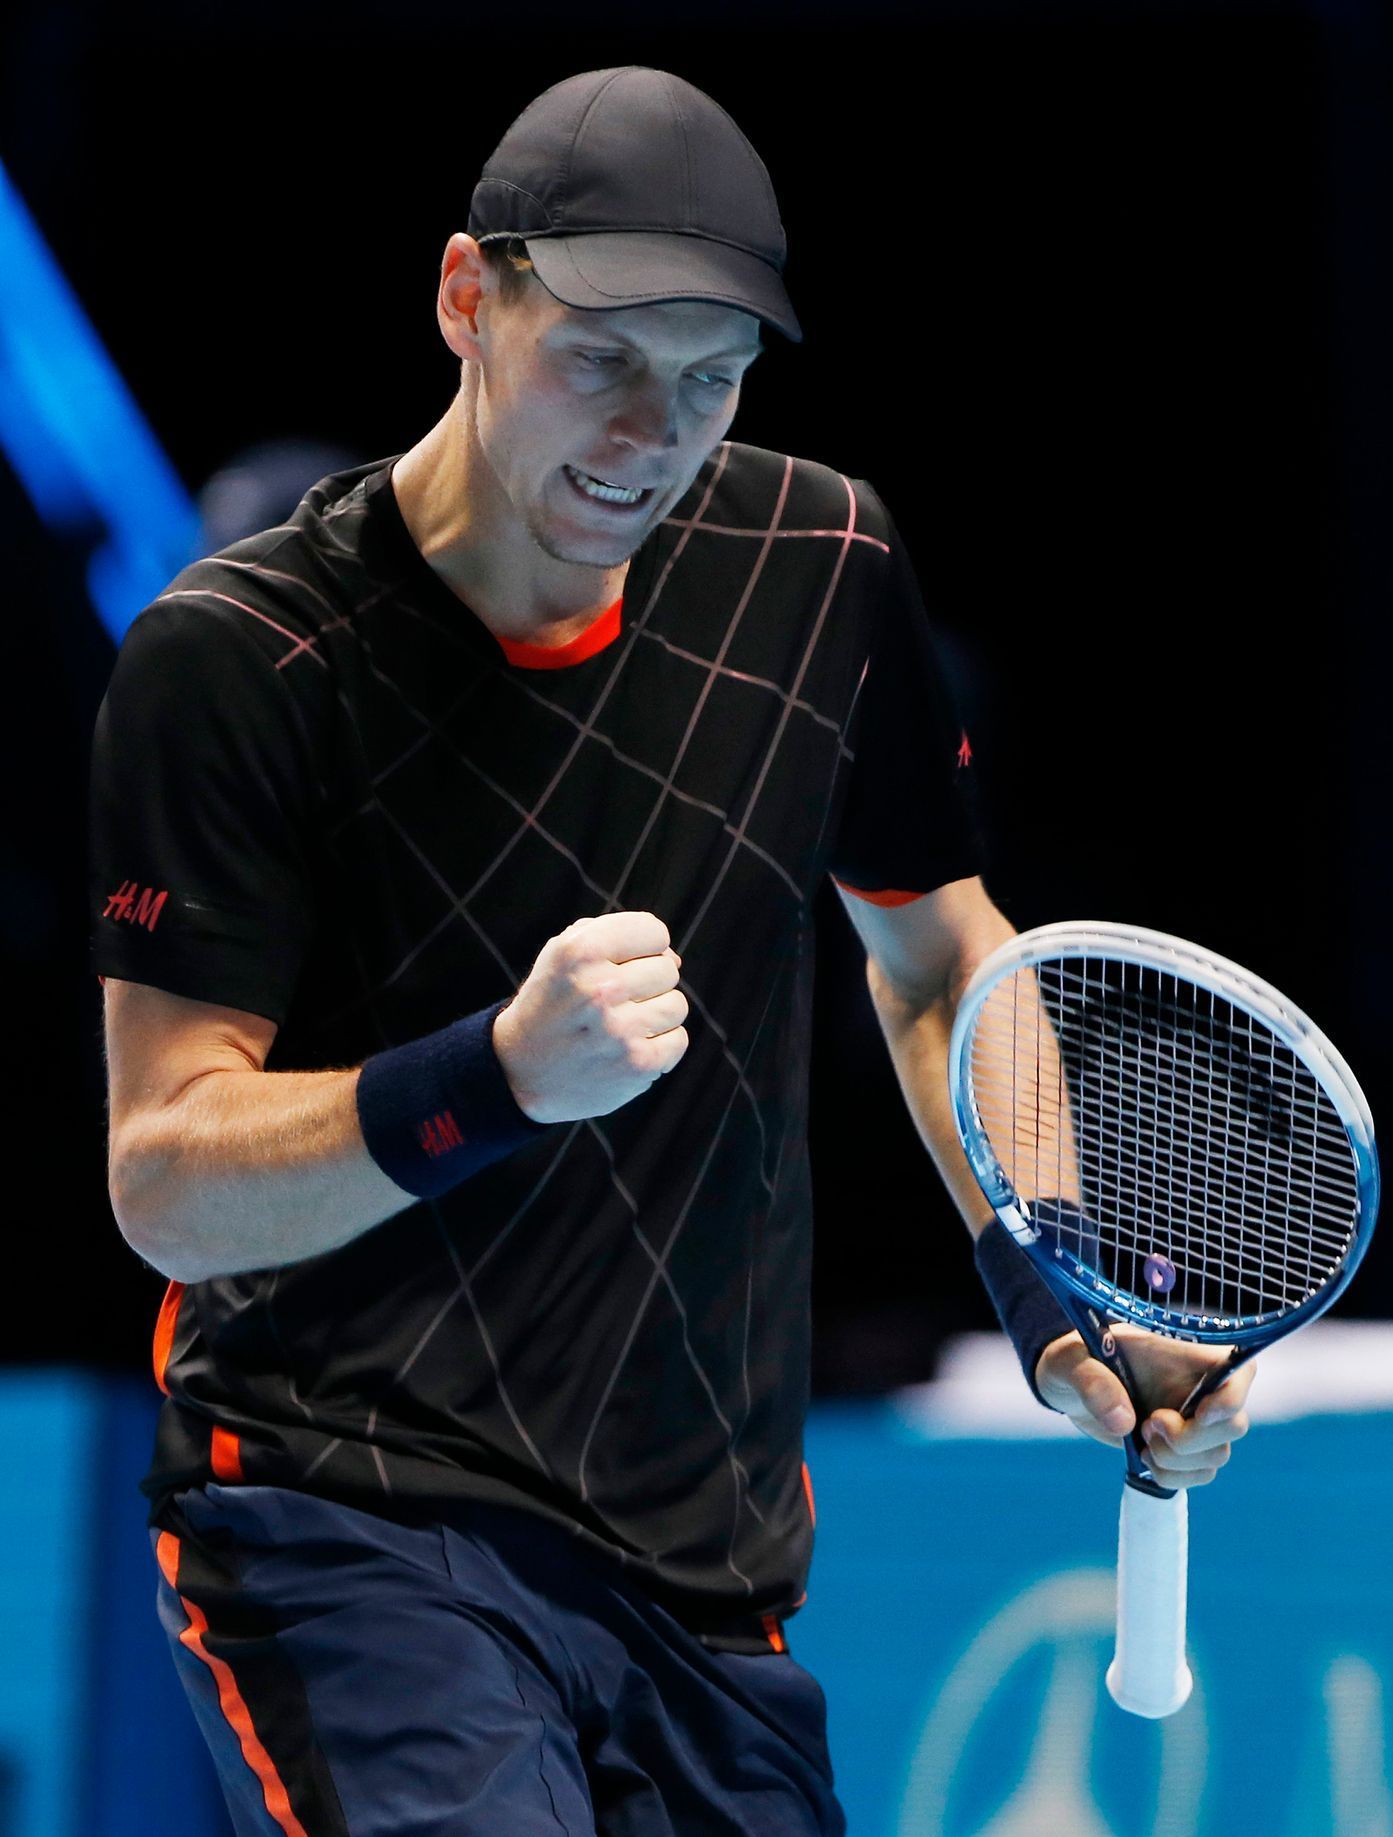 Tomas Berdych of the Czech Republic reacts during his tennis match against Marin Cilic of Croatia at the ATP World Tour finals in London